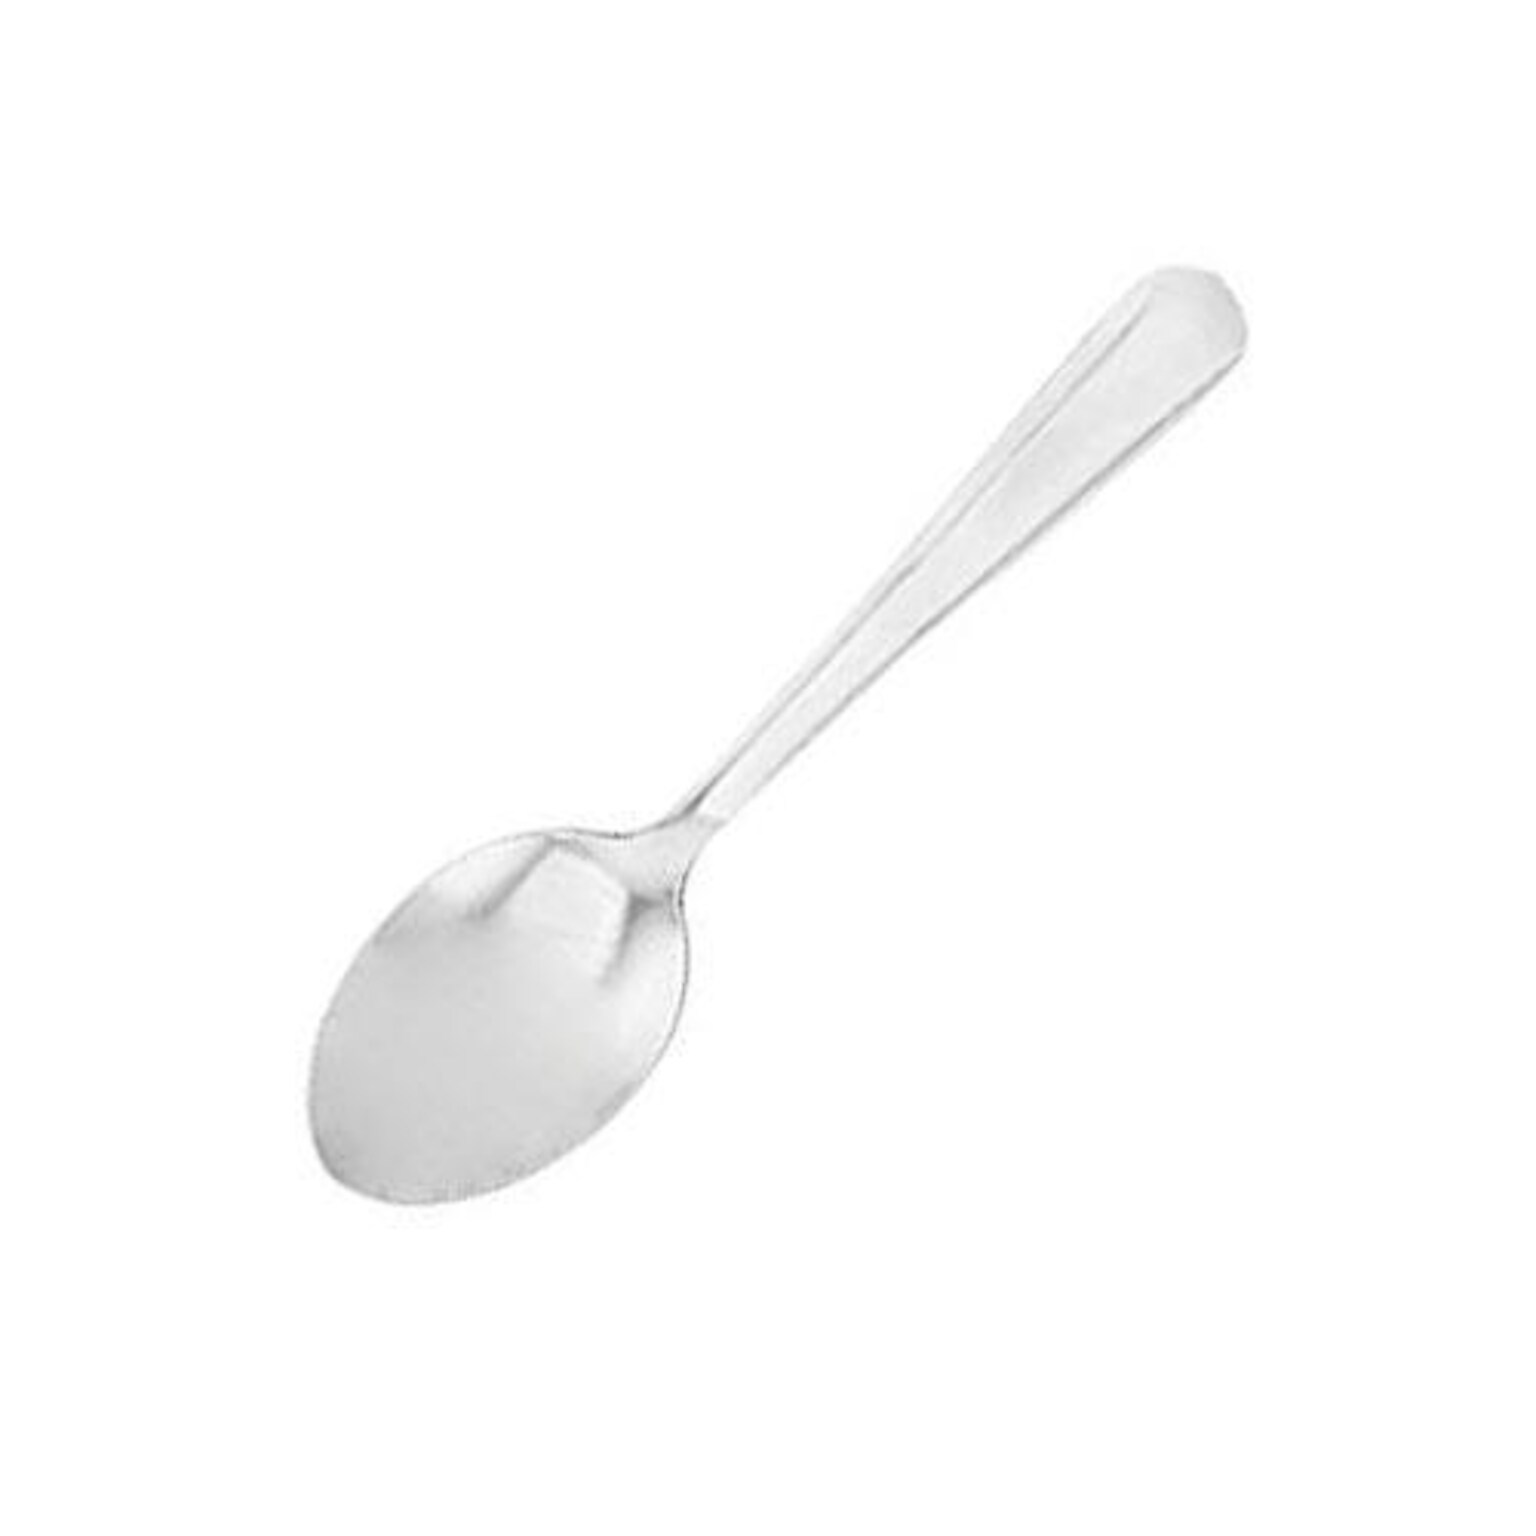 Walco Windsor 7229 Stainless Steel Spoons, 36/Carton